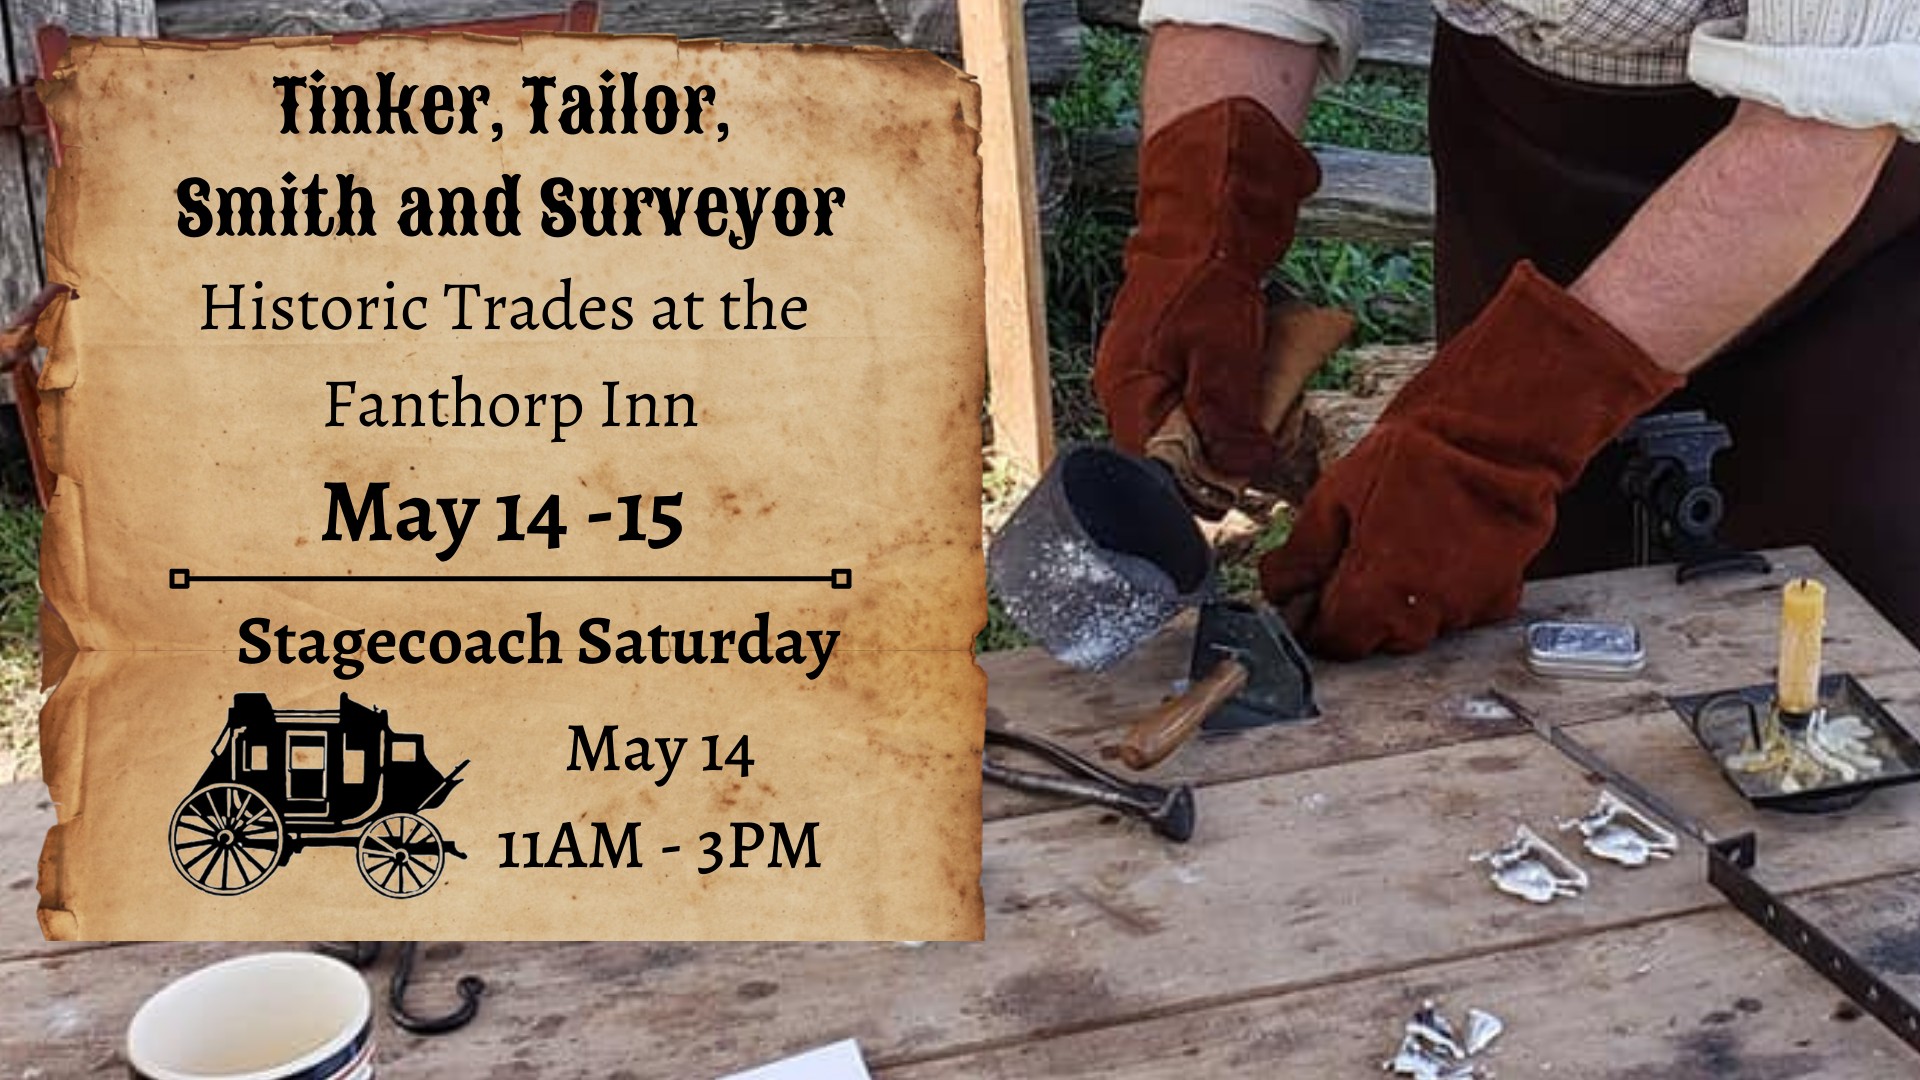 Fanthorp Focus Weekend - Tinker, Tailor, Smith and Surveyor